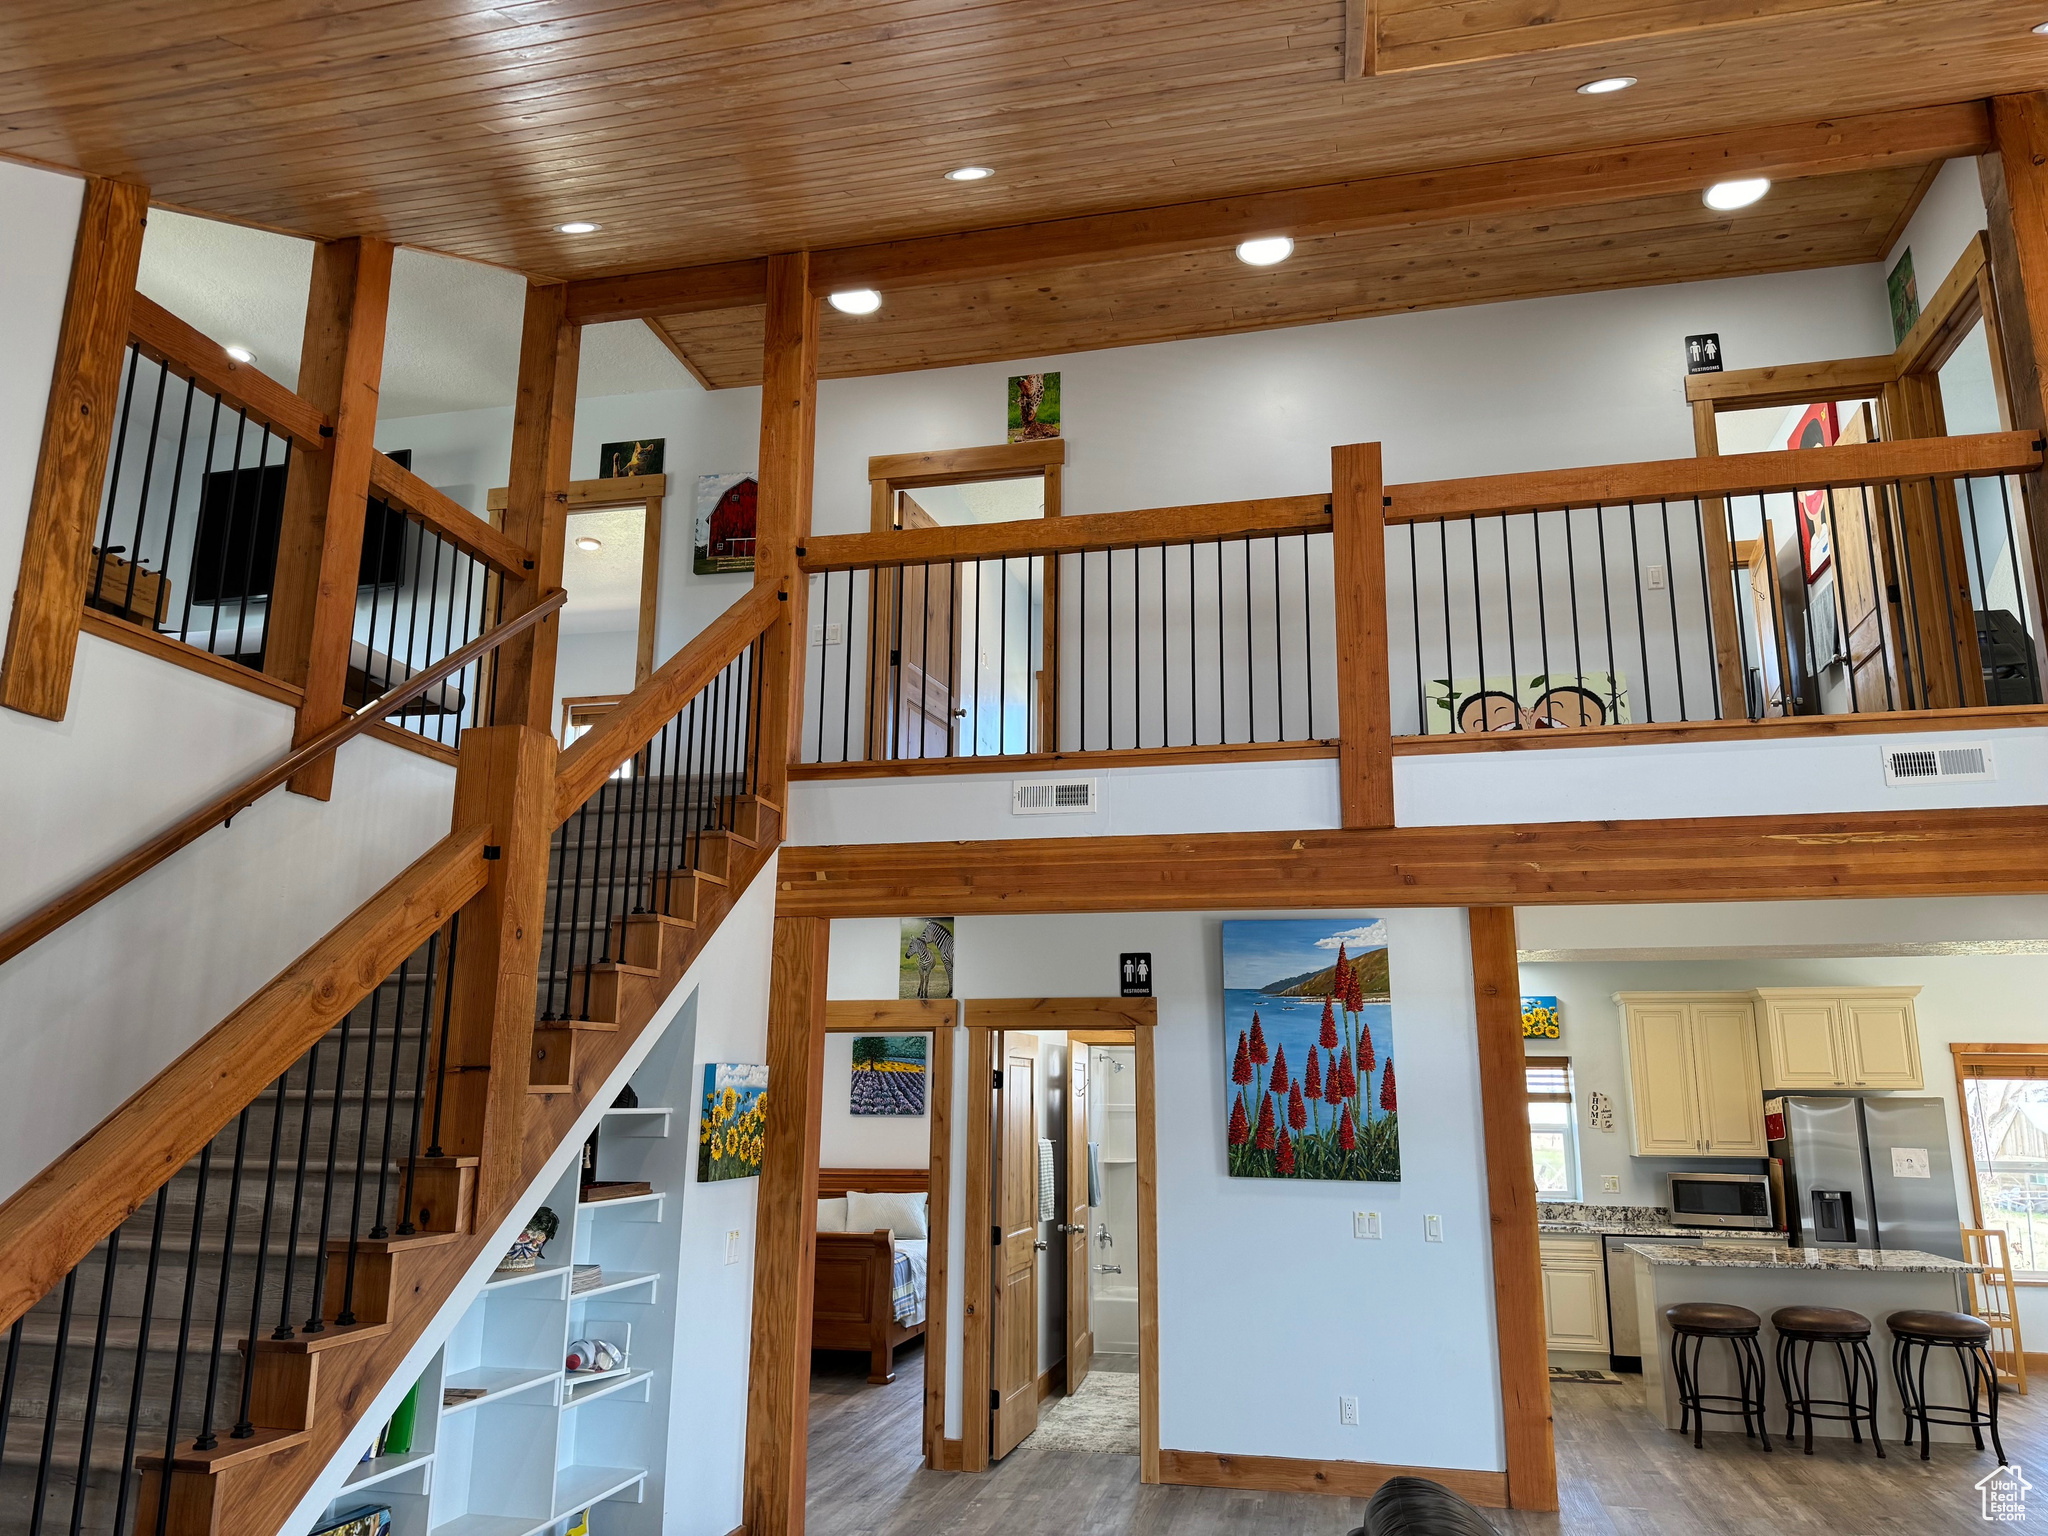 Staircase featuring wood ceiling and lLVP flooring